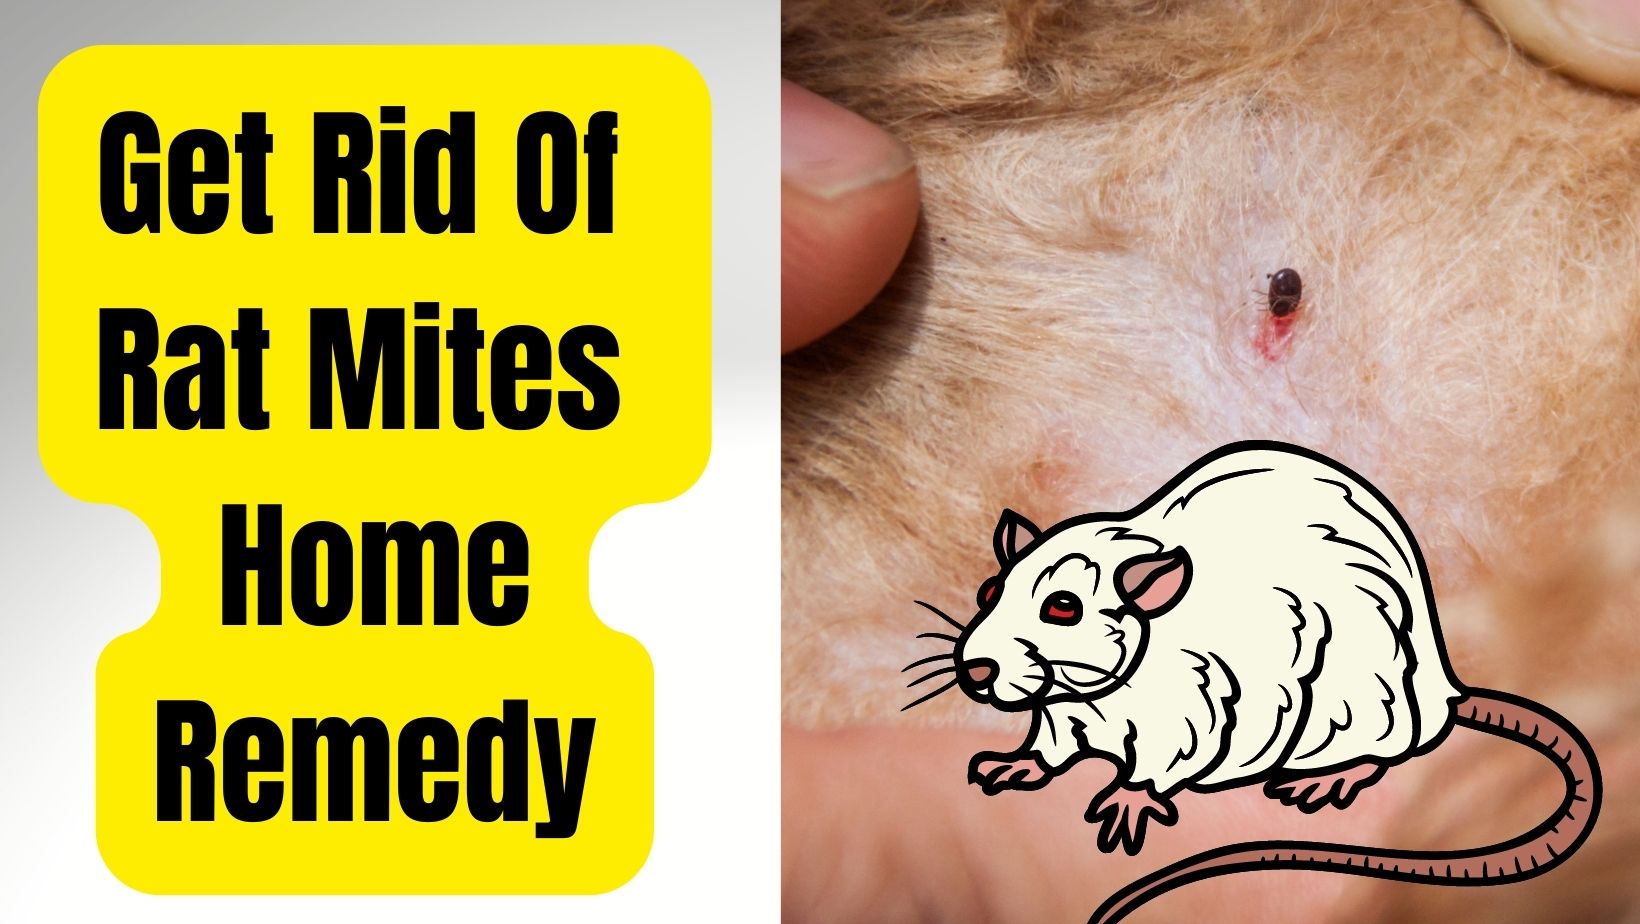 Mites on Rats Home Remedy – Safe & Works Wonders!